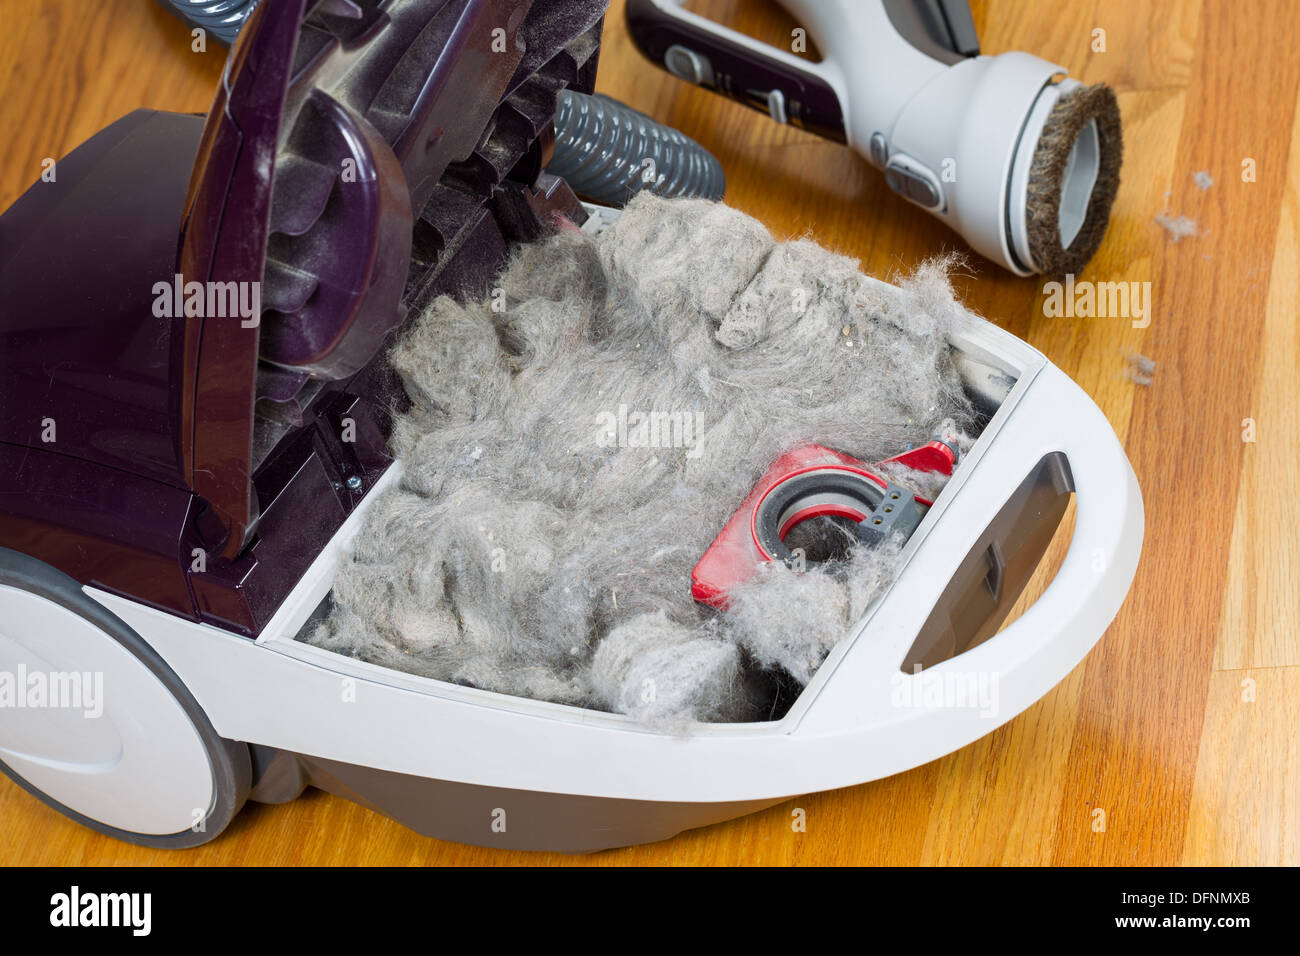 Horizontal photo completely filled dirty vacuum cleaner with hardwood floors and accessories in background Stock Photo